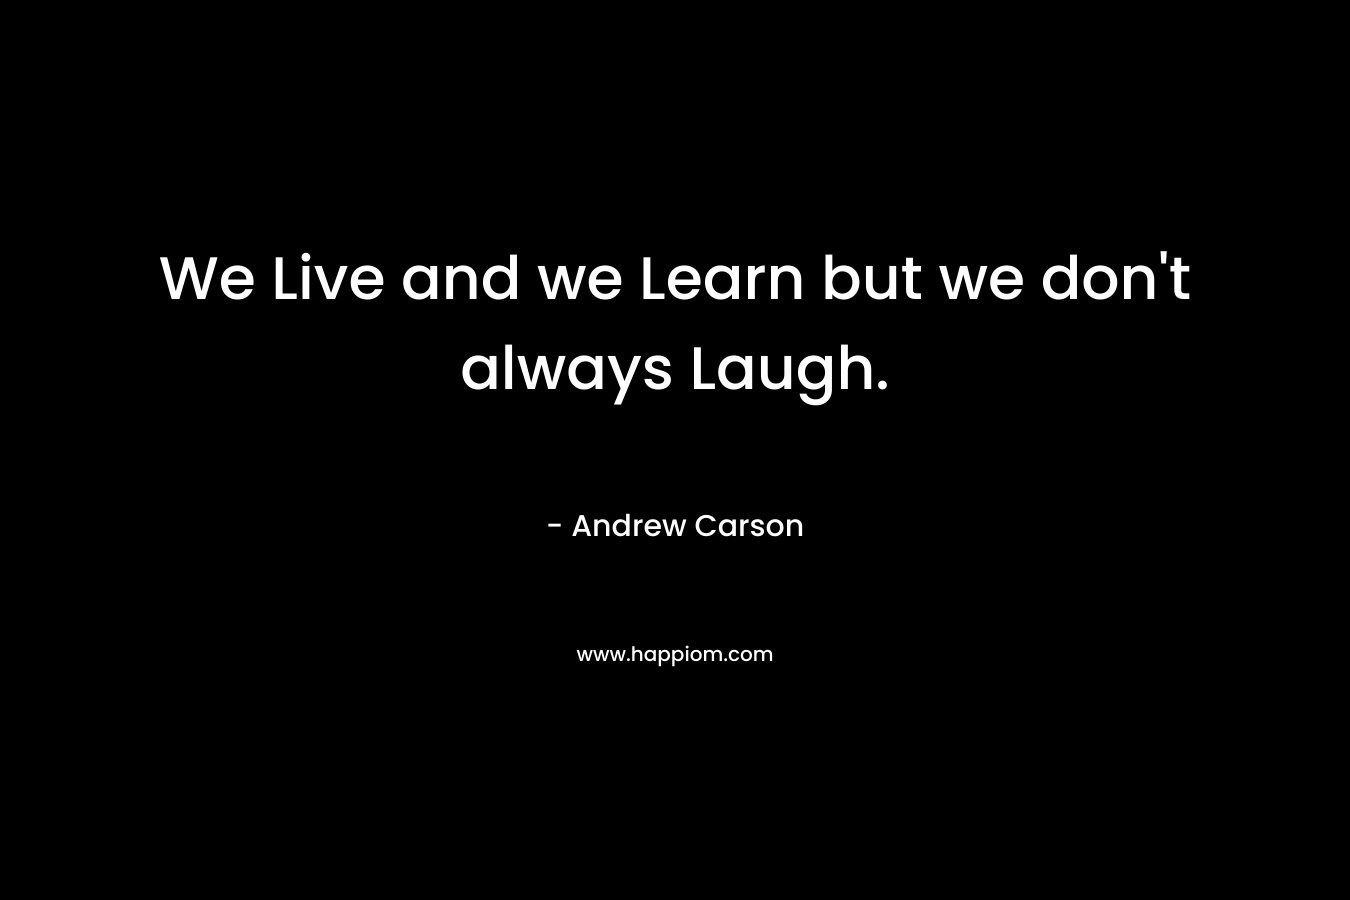 We Live and we Learn but we don’t always Laugh. – Andrew Carson